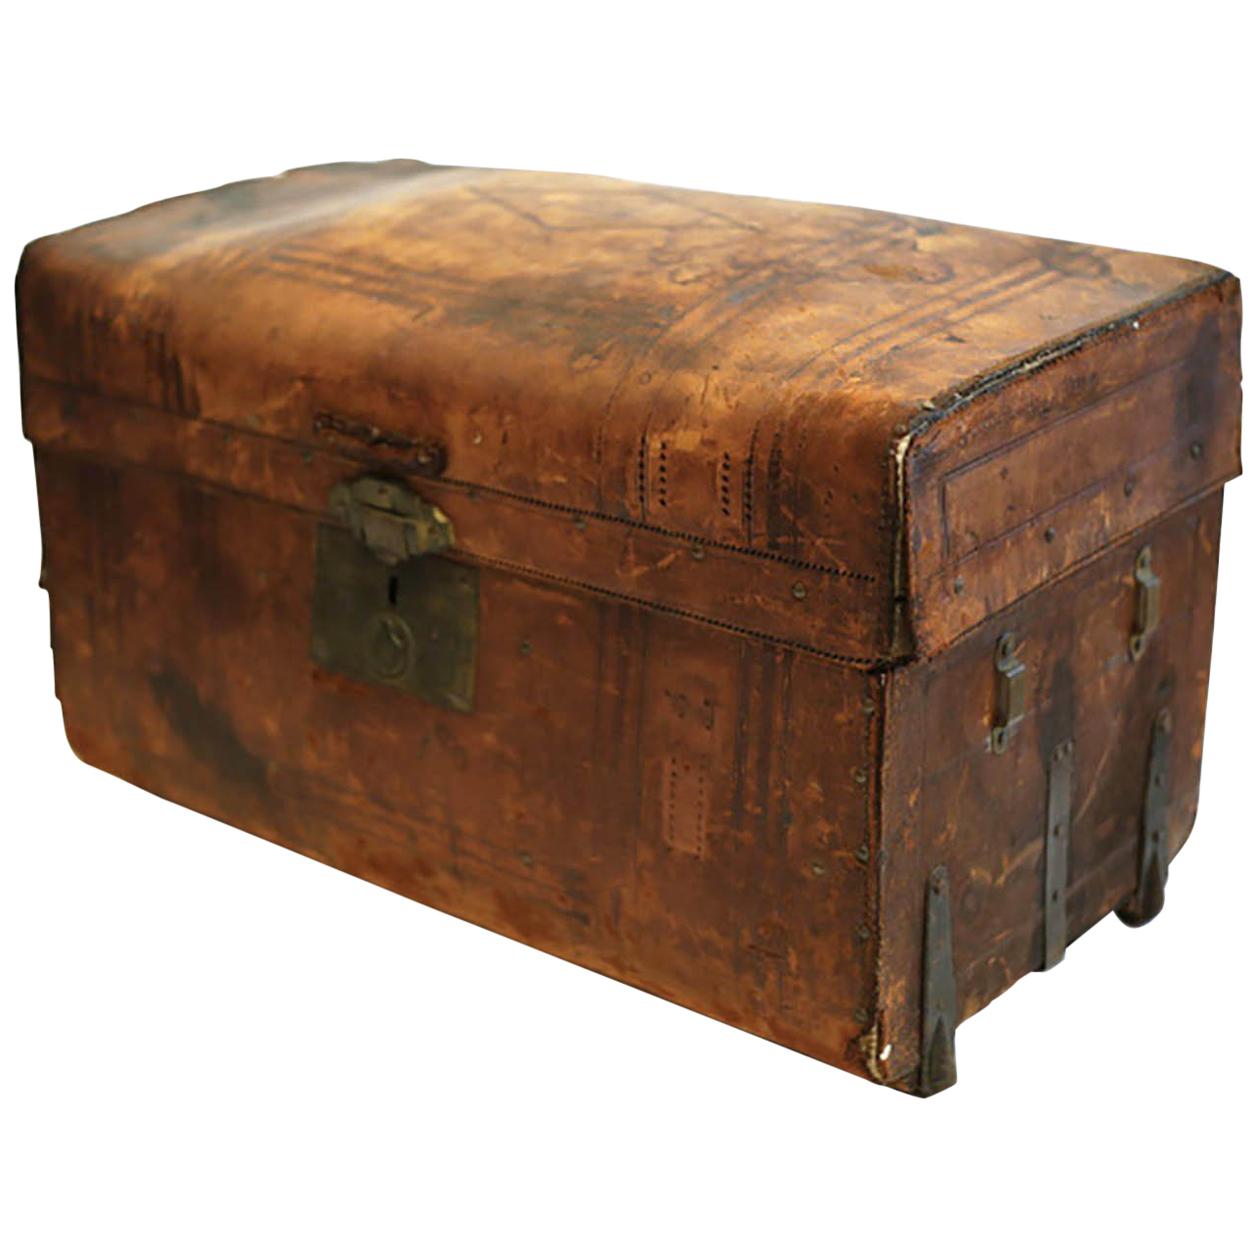 Embossed Leather and Brass Trunk by Martin & Co. San Francisco c.1850-1890